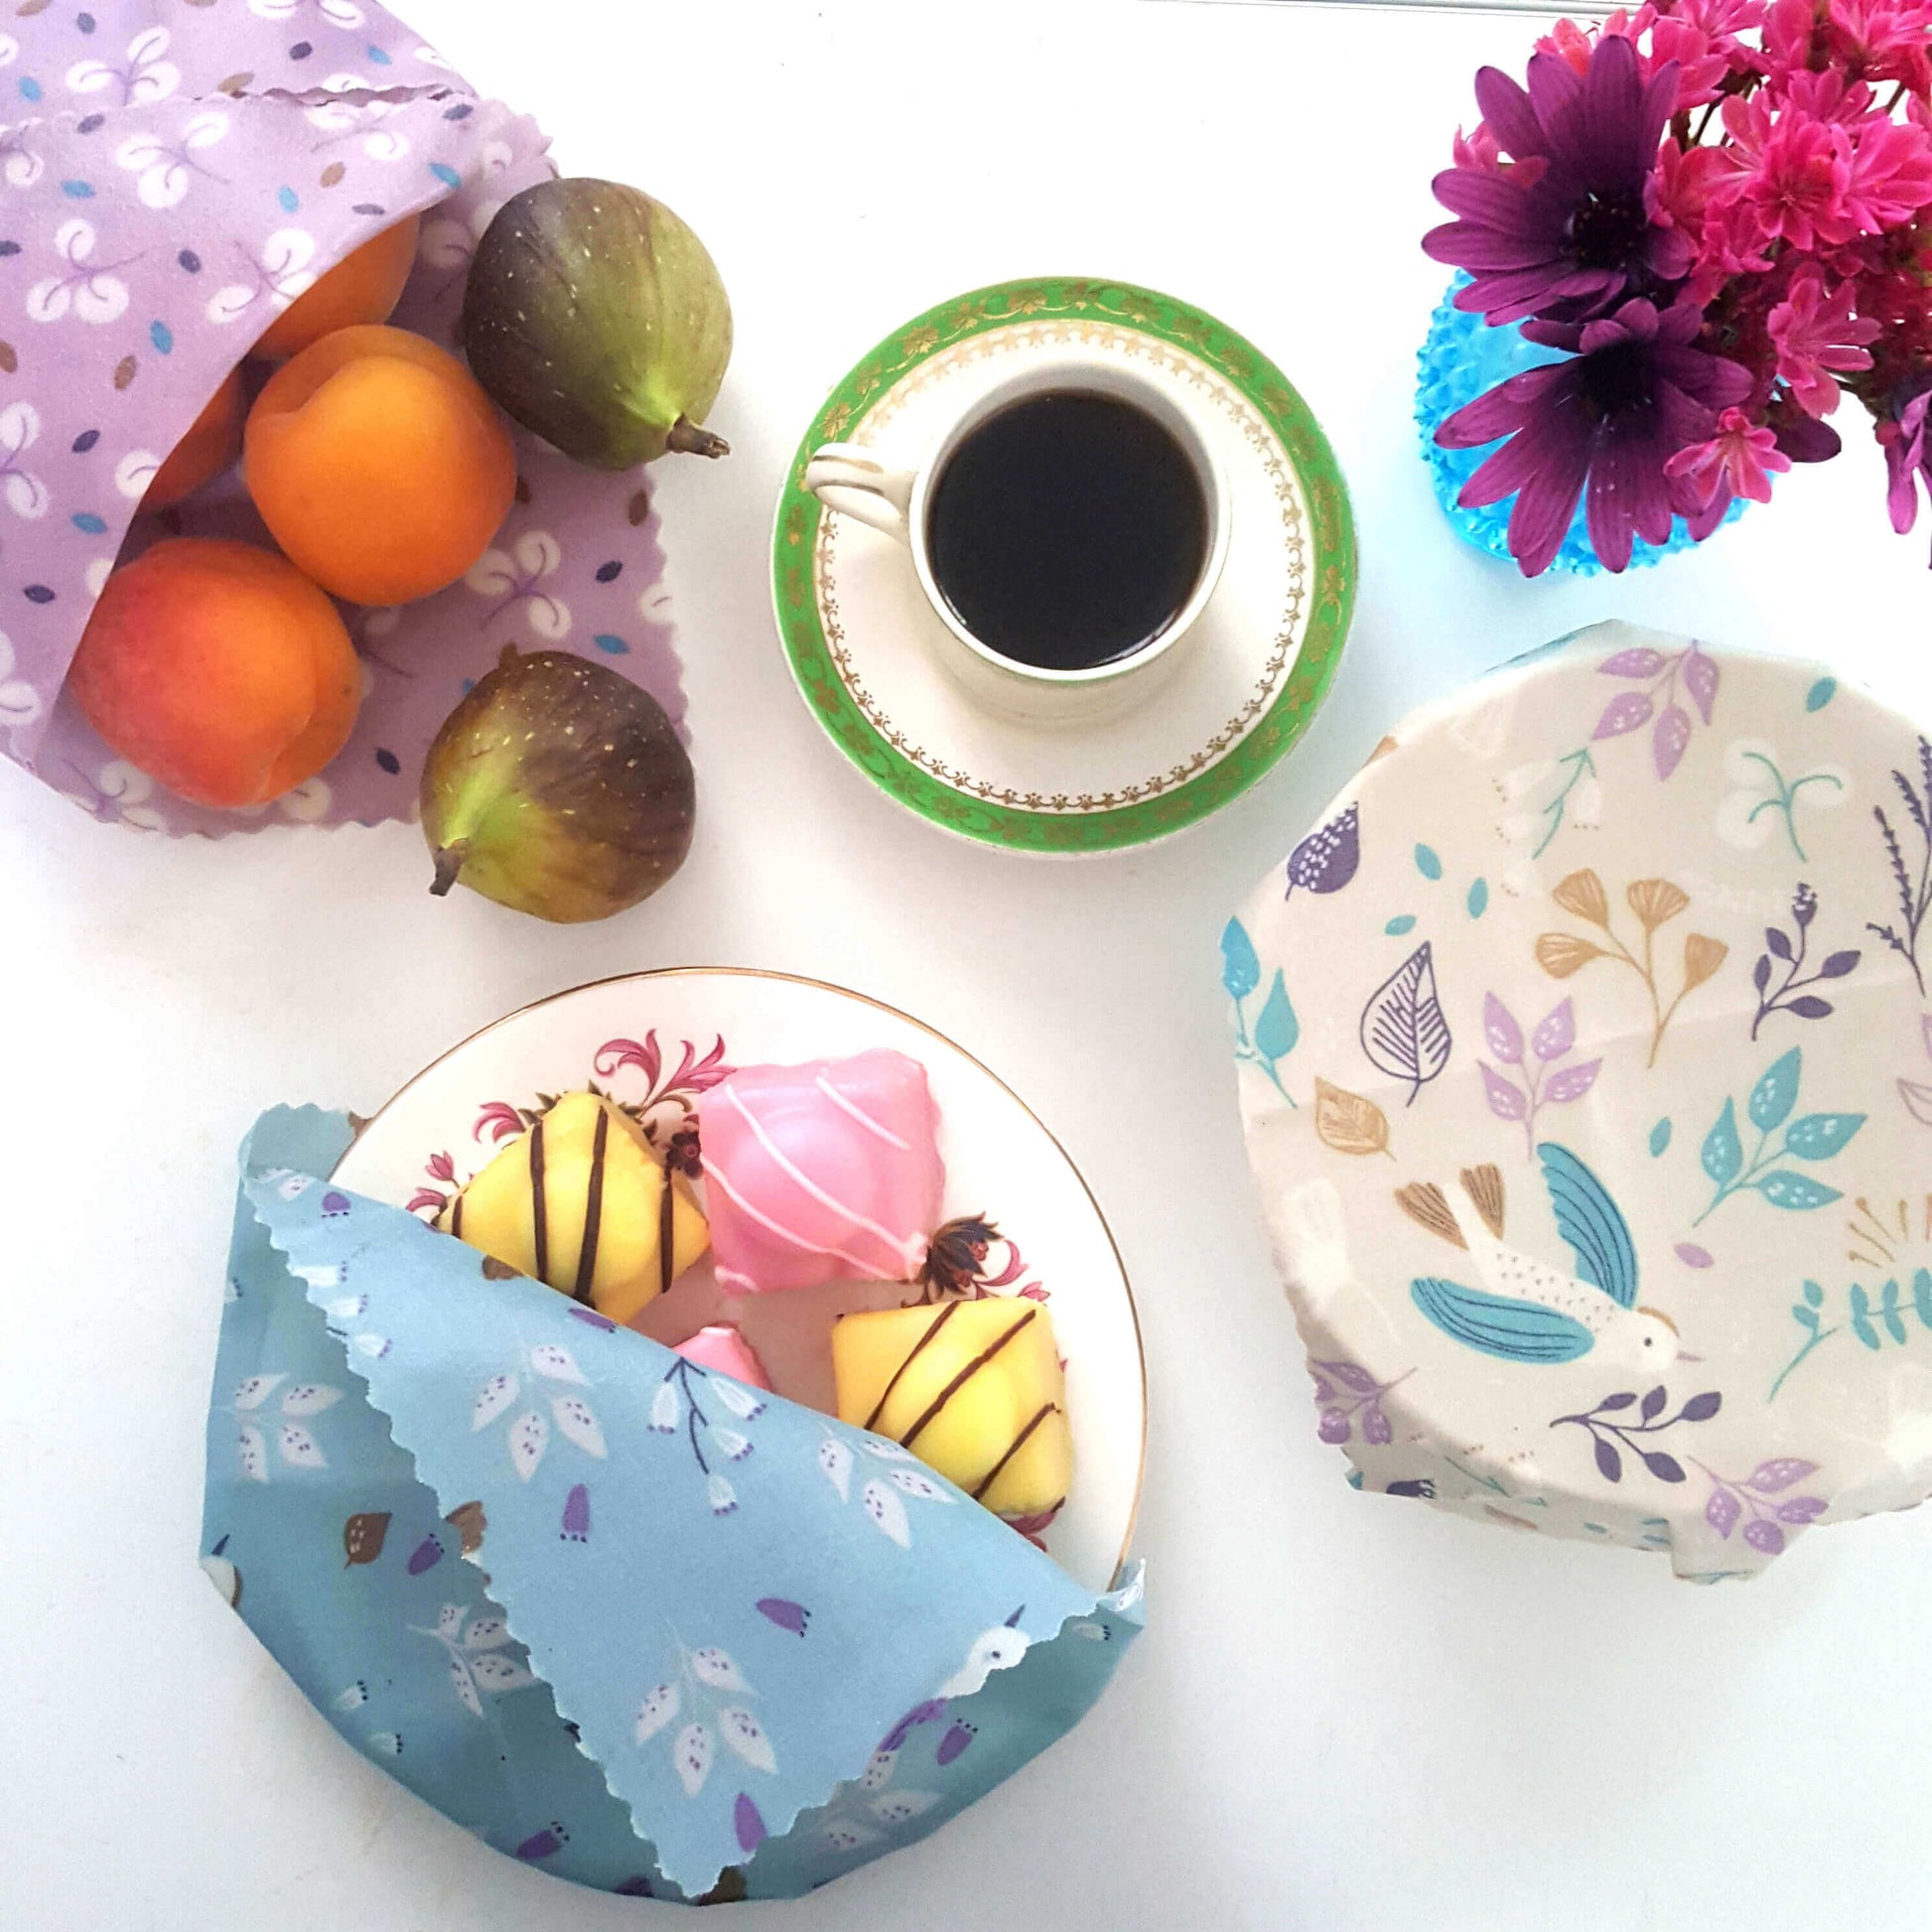 Reusable Beeswax Food Wraps 100% Hand Made in the UK by Honey Bee Good shown in Set of 3 Heritage Love Birds pattern flatlay